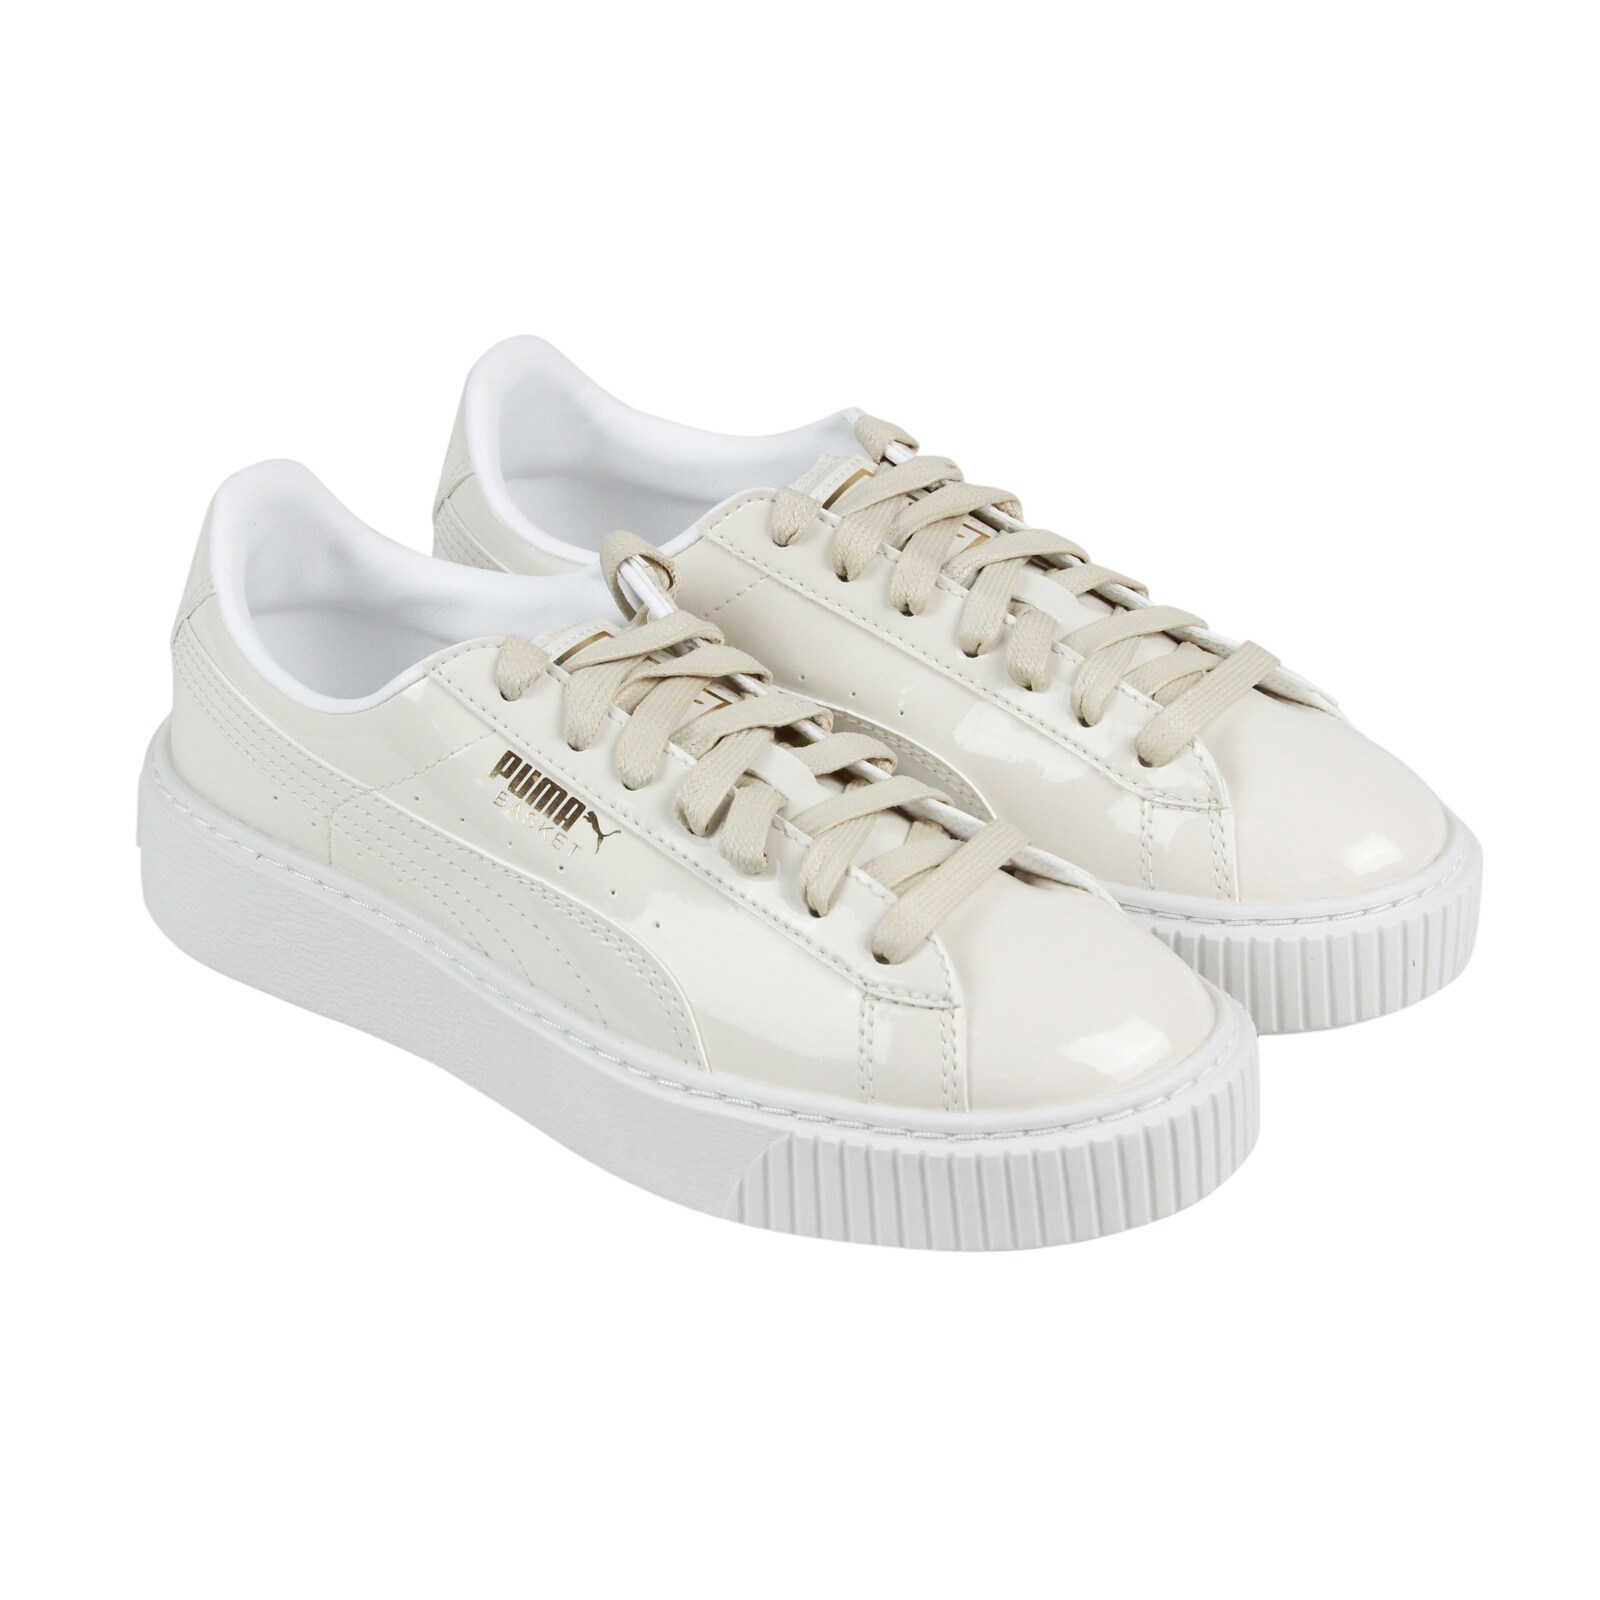 Patent Leather Sneakers Shoes 